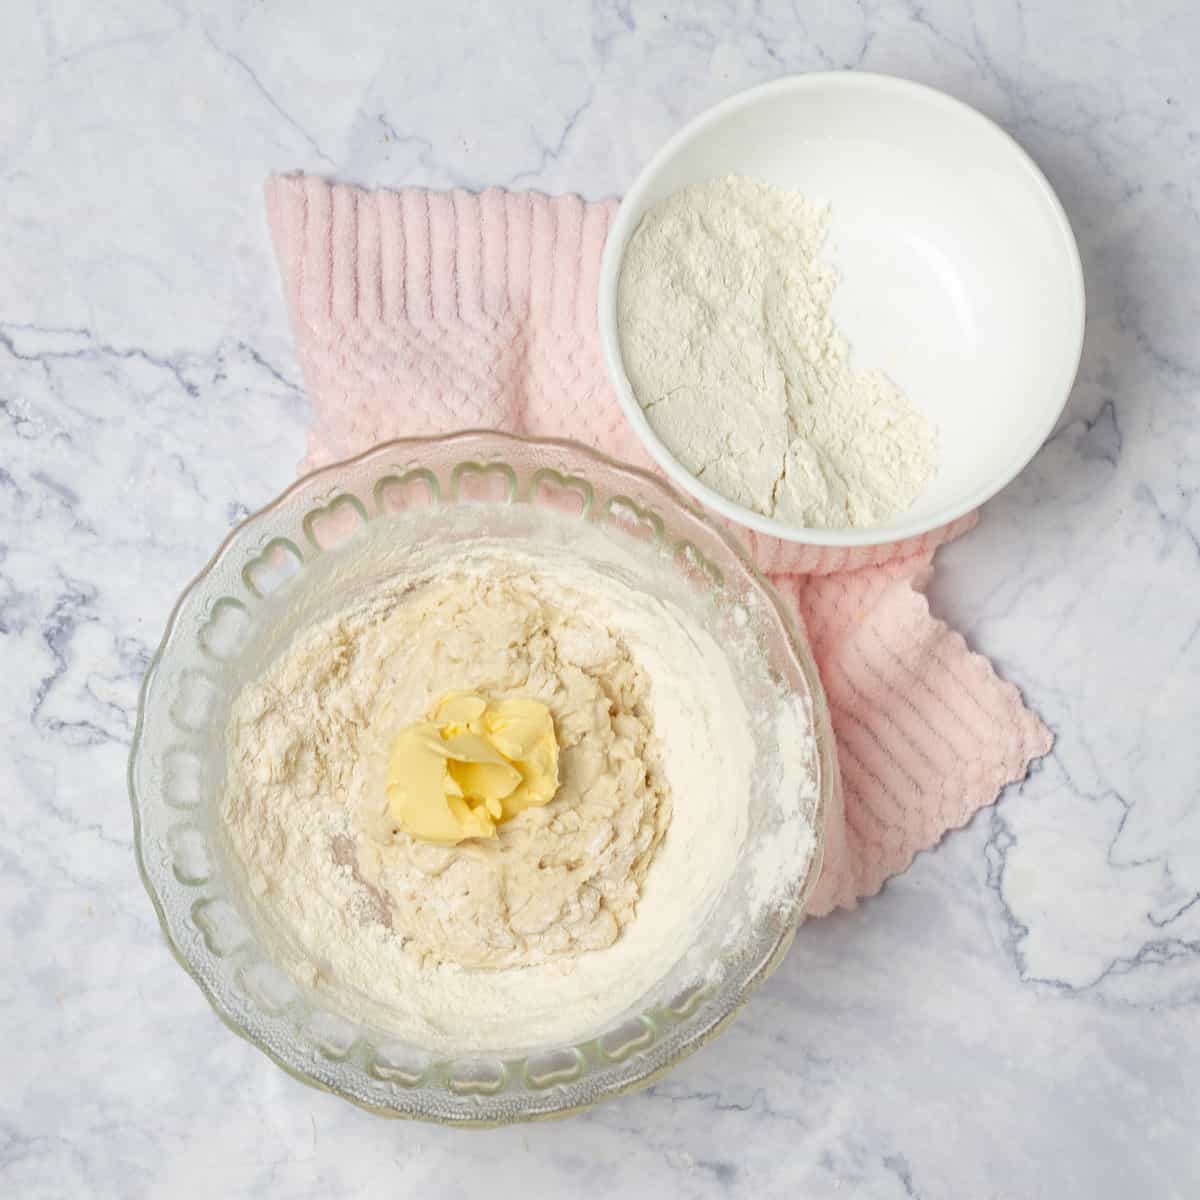 Combine the active dry yeast with cup warm water in a small bowl. In a separate bowl, cut the butter into the flour.